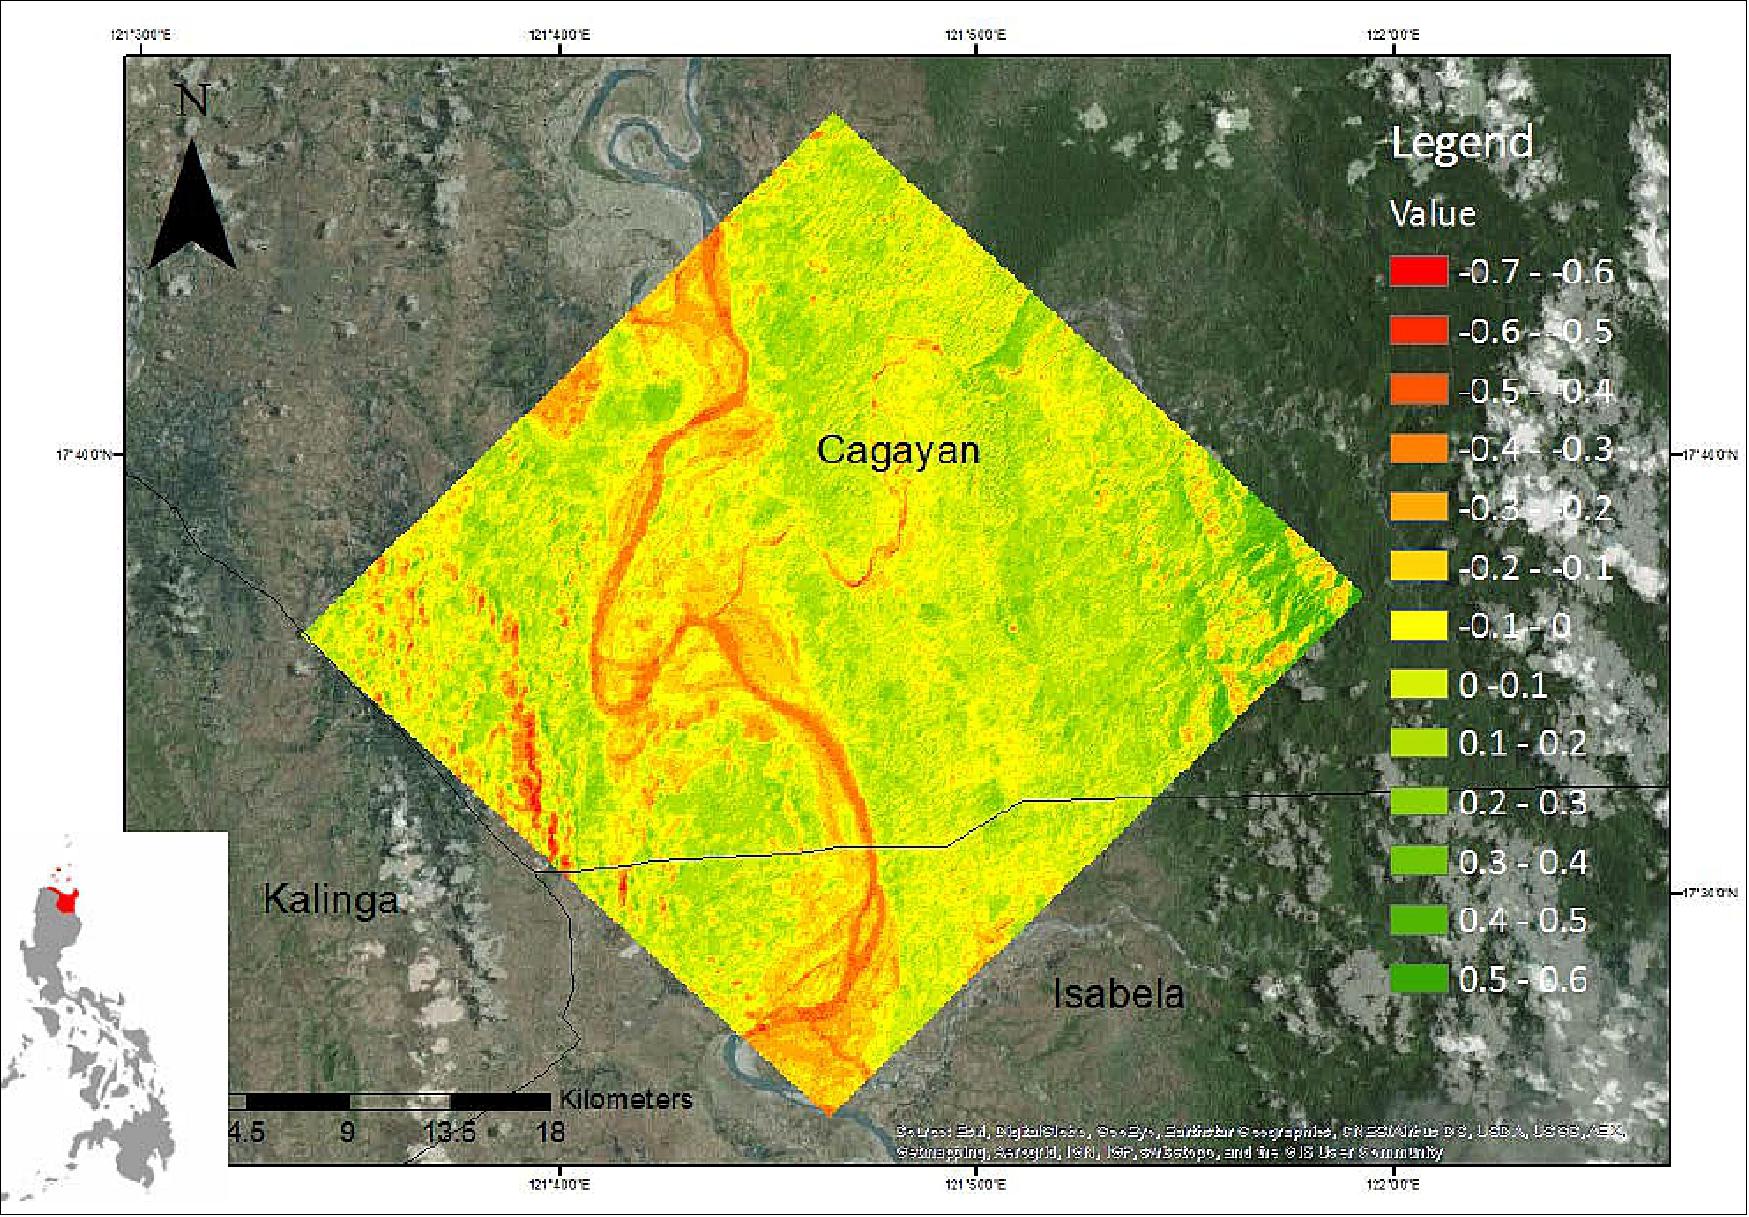 Figure 8: SMI (Spaceborne Multispectral Imager) NDVI (Normalized Difference Vegetation Index) map of Cagayan, Philippines, captured on 24 October 2016 at 07:29:34 PHT (Philippine Time), image credit: DOST/ASTI